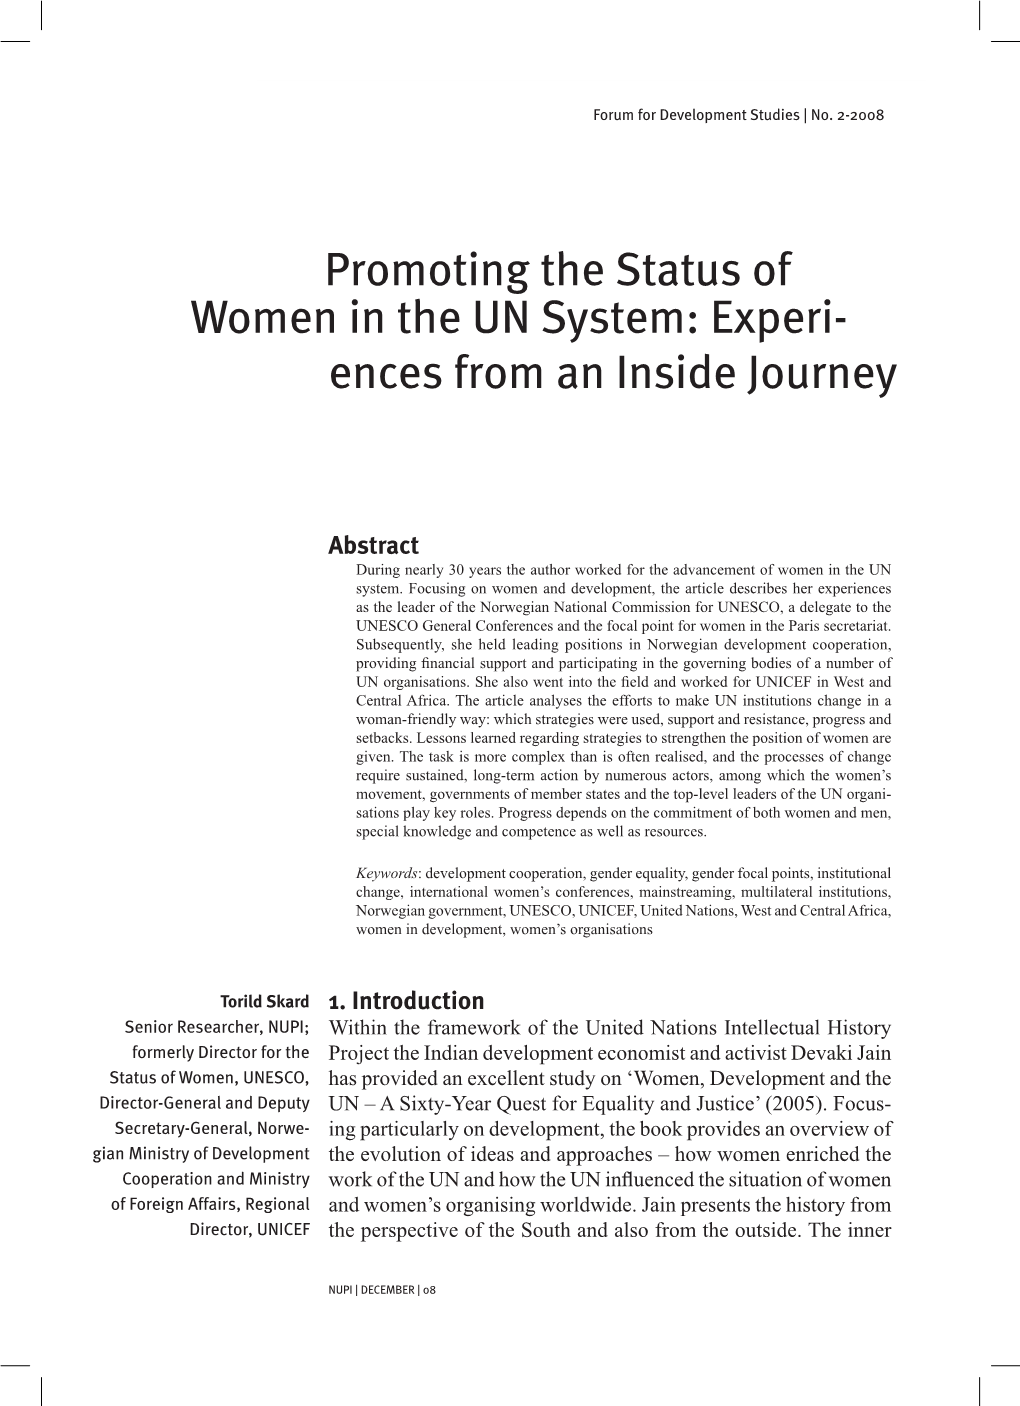 Promoting the Status of Women in the UN System: Experi- Ences from an Inside Journey